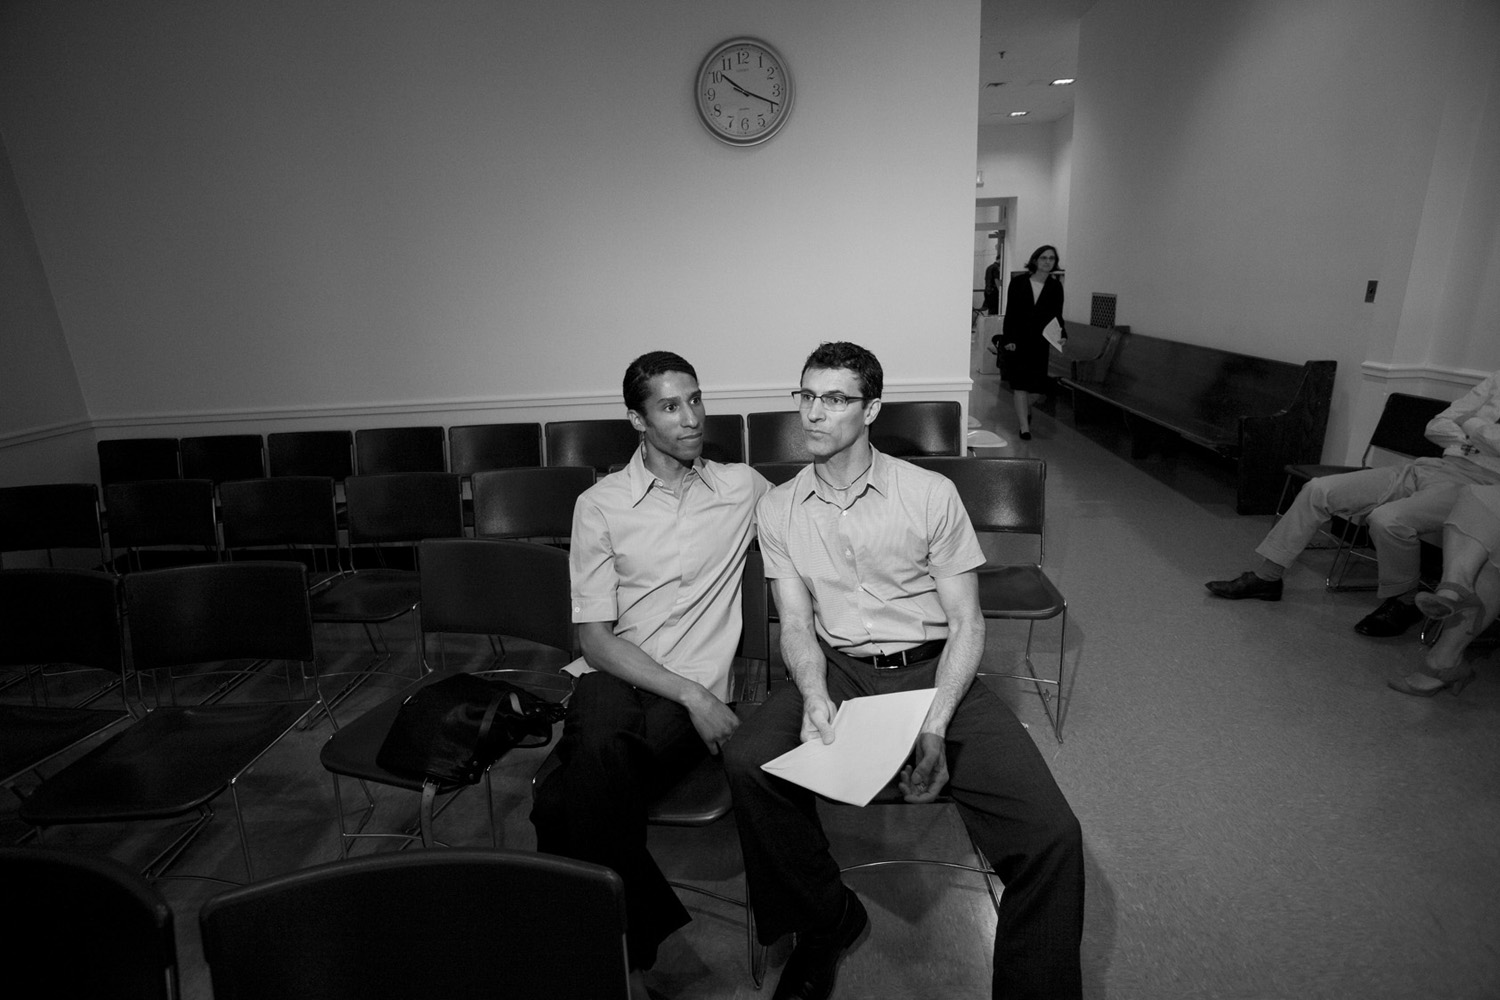 Same sex couple Michael Argilla and Stacy Spence wait for their marriage ceremony to begin at Brooklyn Municipal Building, Brooklyn Borough Hall.  The couple, who has been together for 20 years, says,  this ceremony affirms their love and commitment to each other.